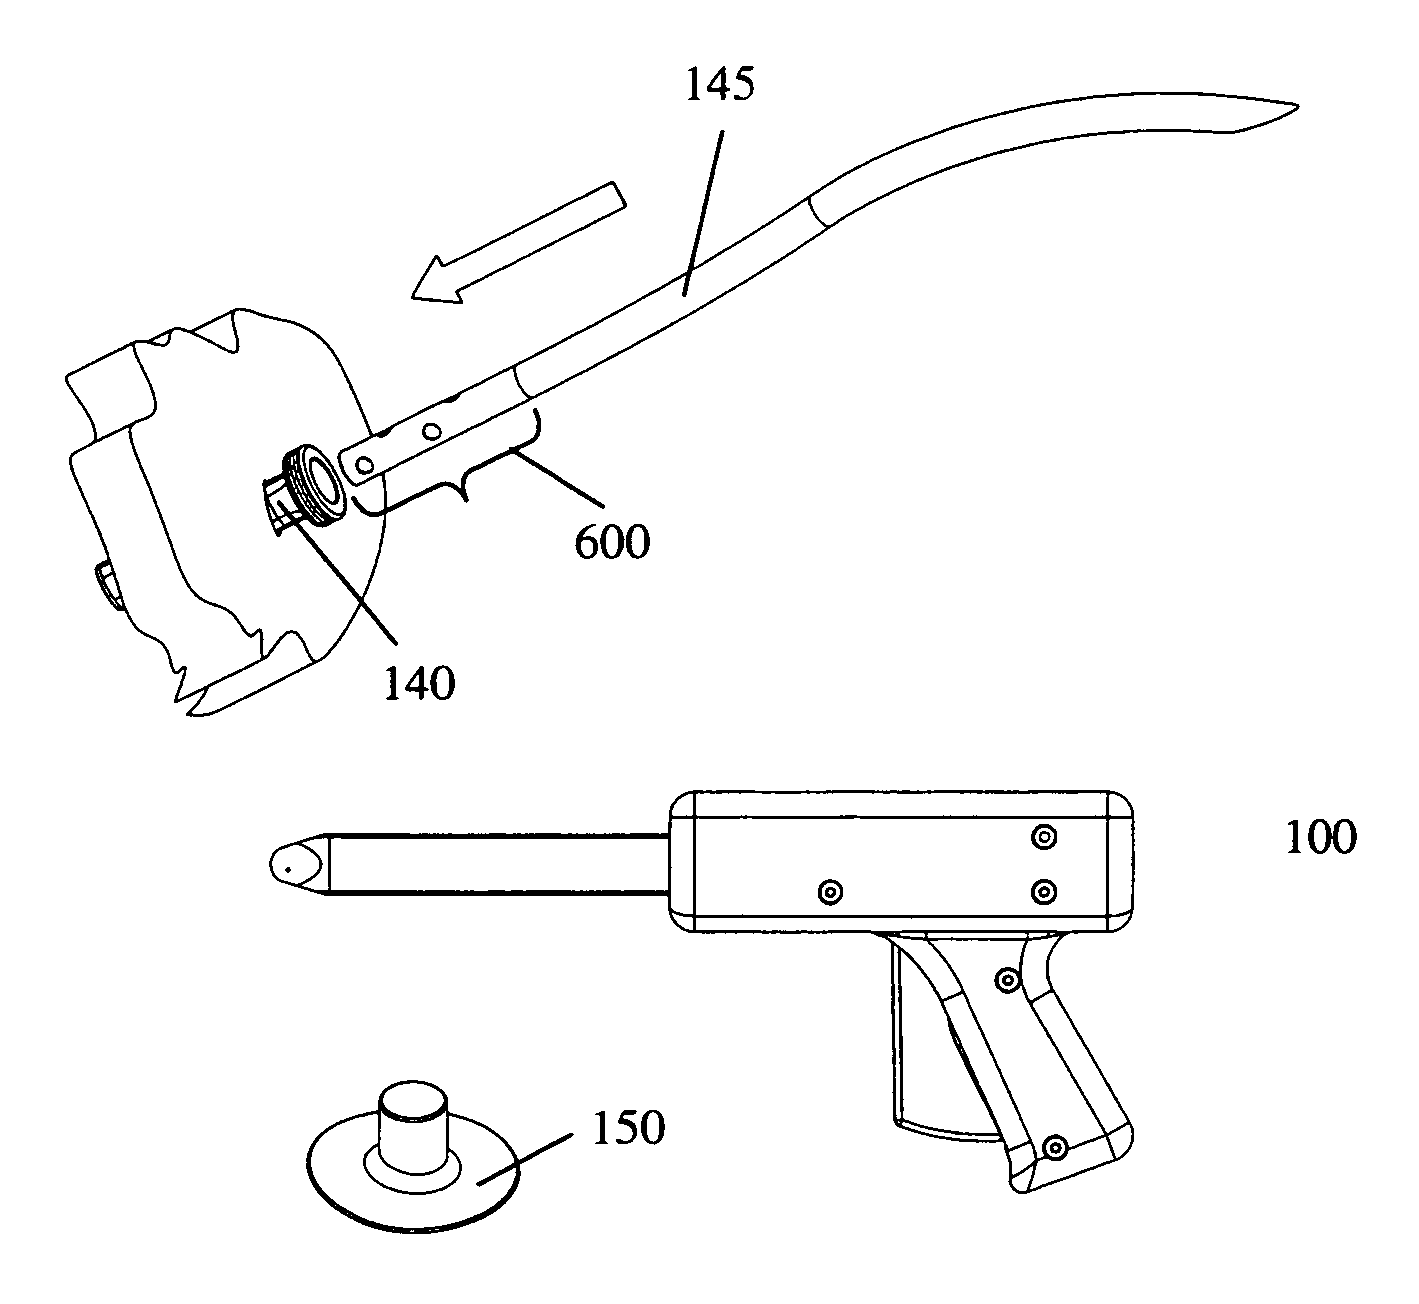 System and method for rapid placement of chest tubes